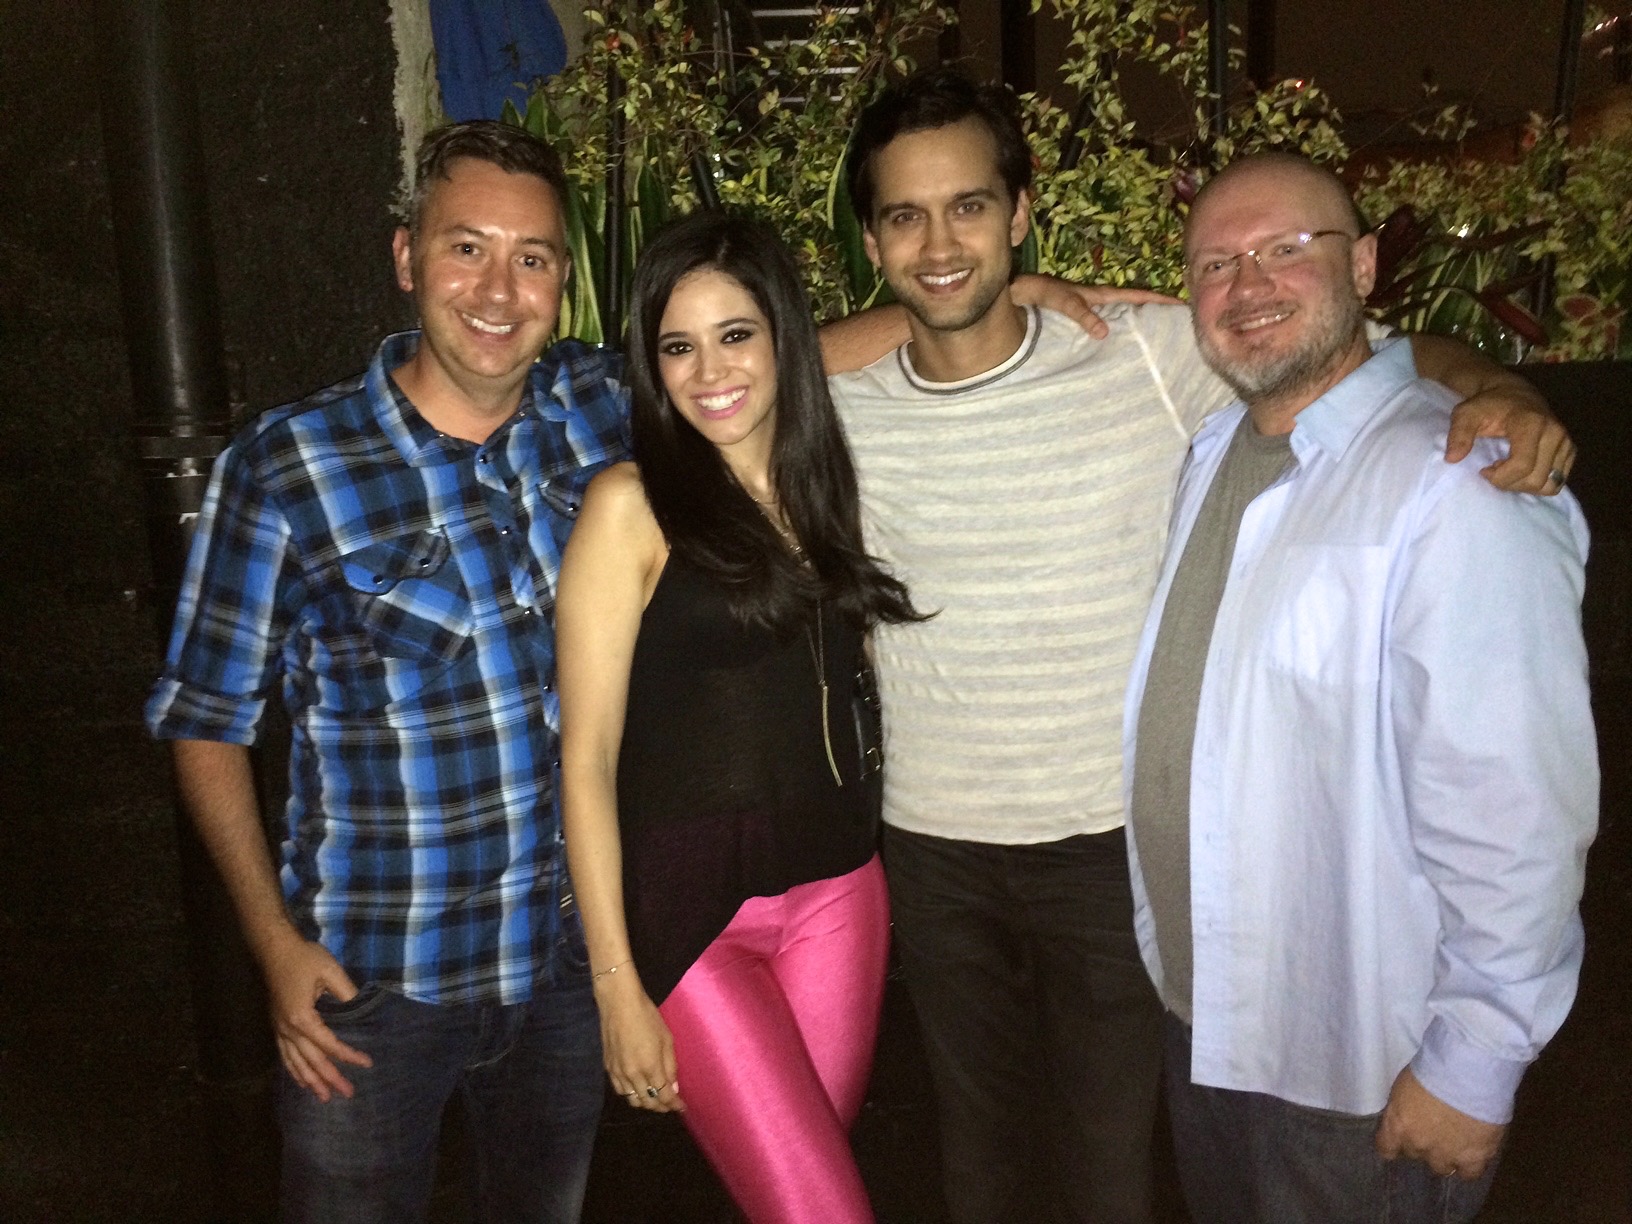 Ana Maria in Novela Land wrap party with Zach O'Brien, Edy Ganem and Michael Steger